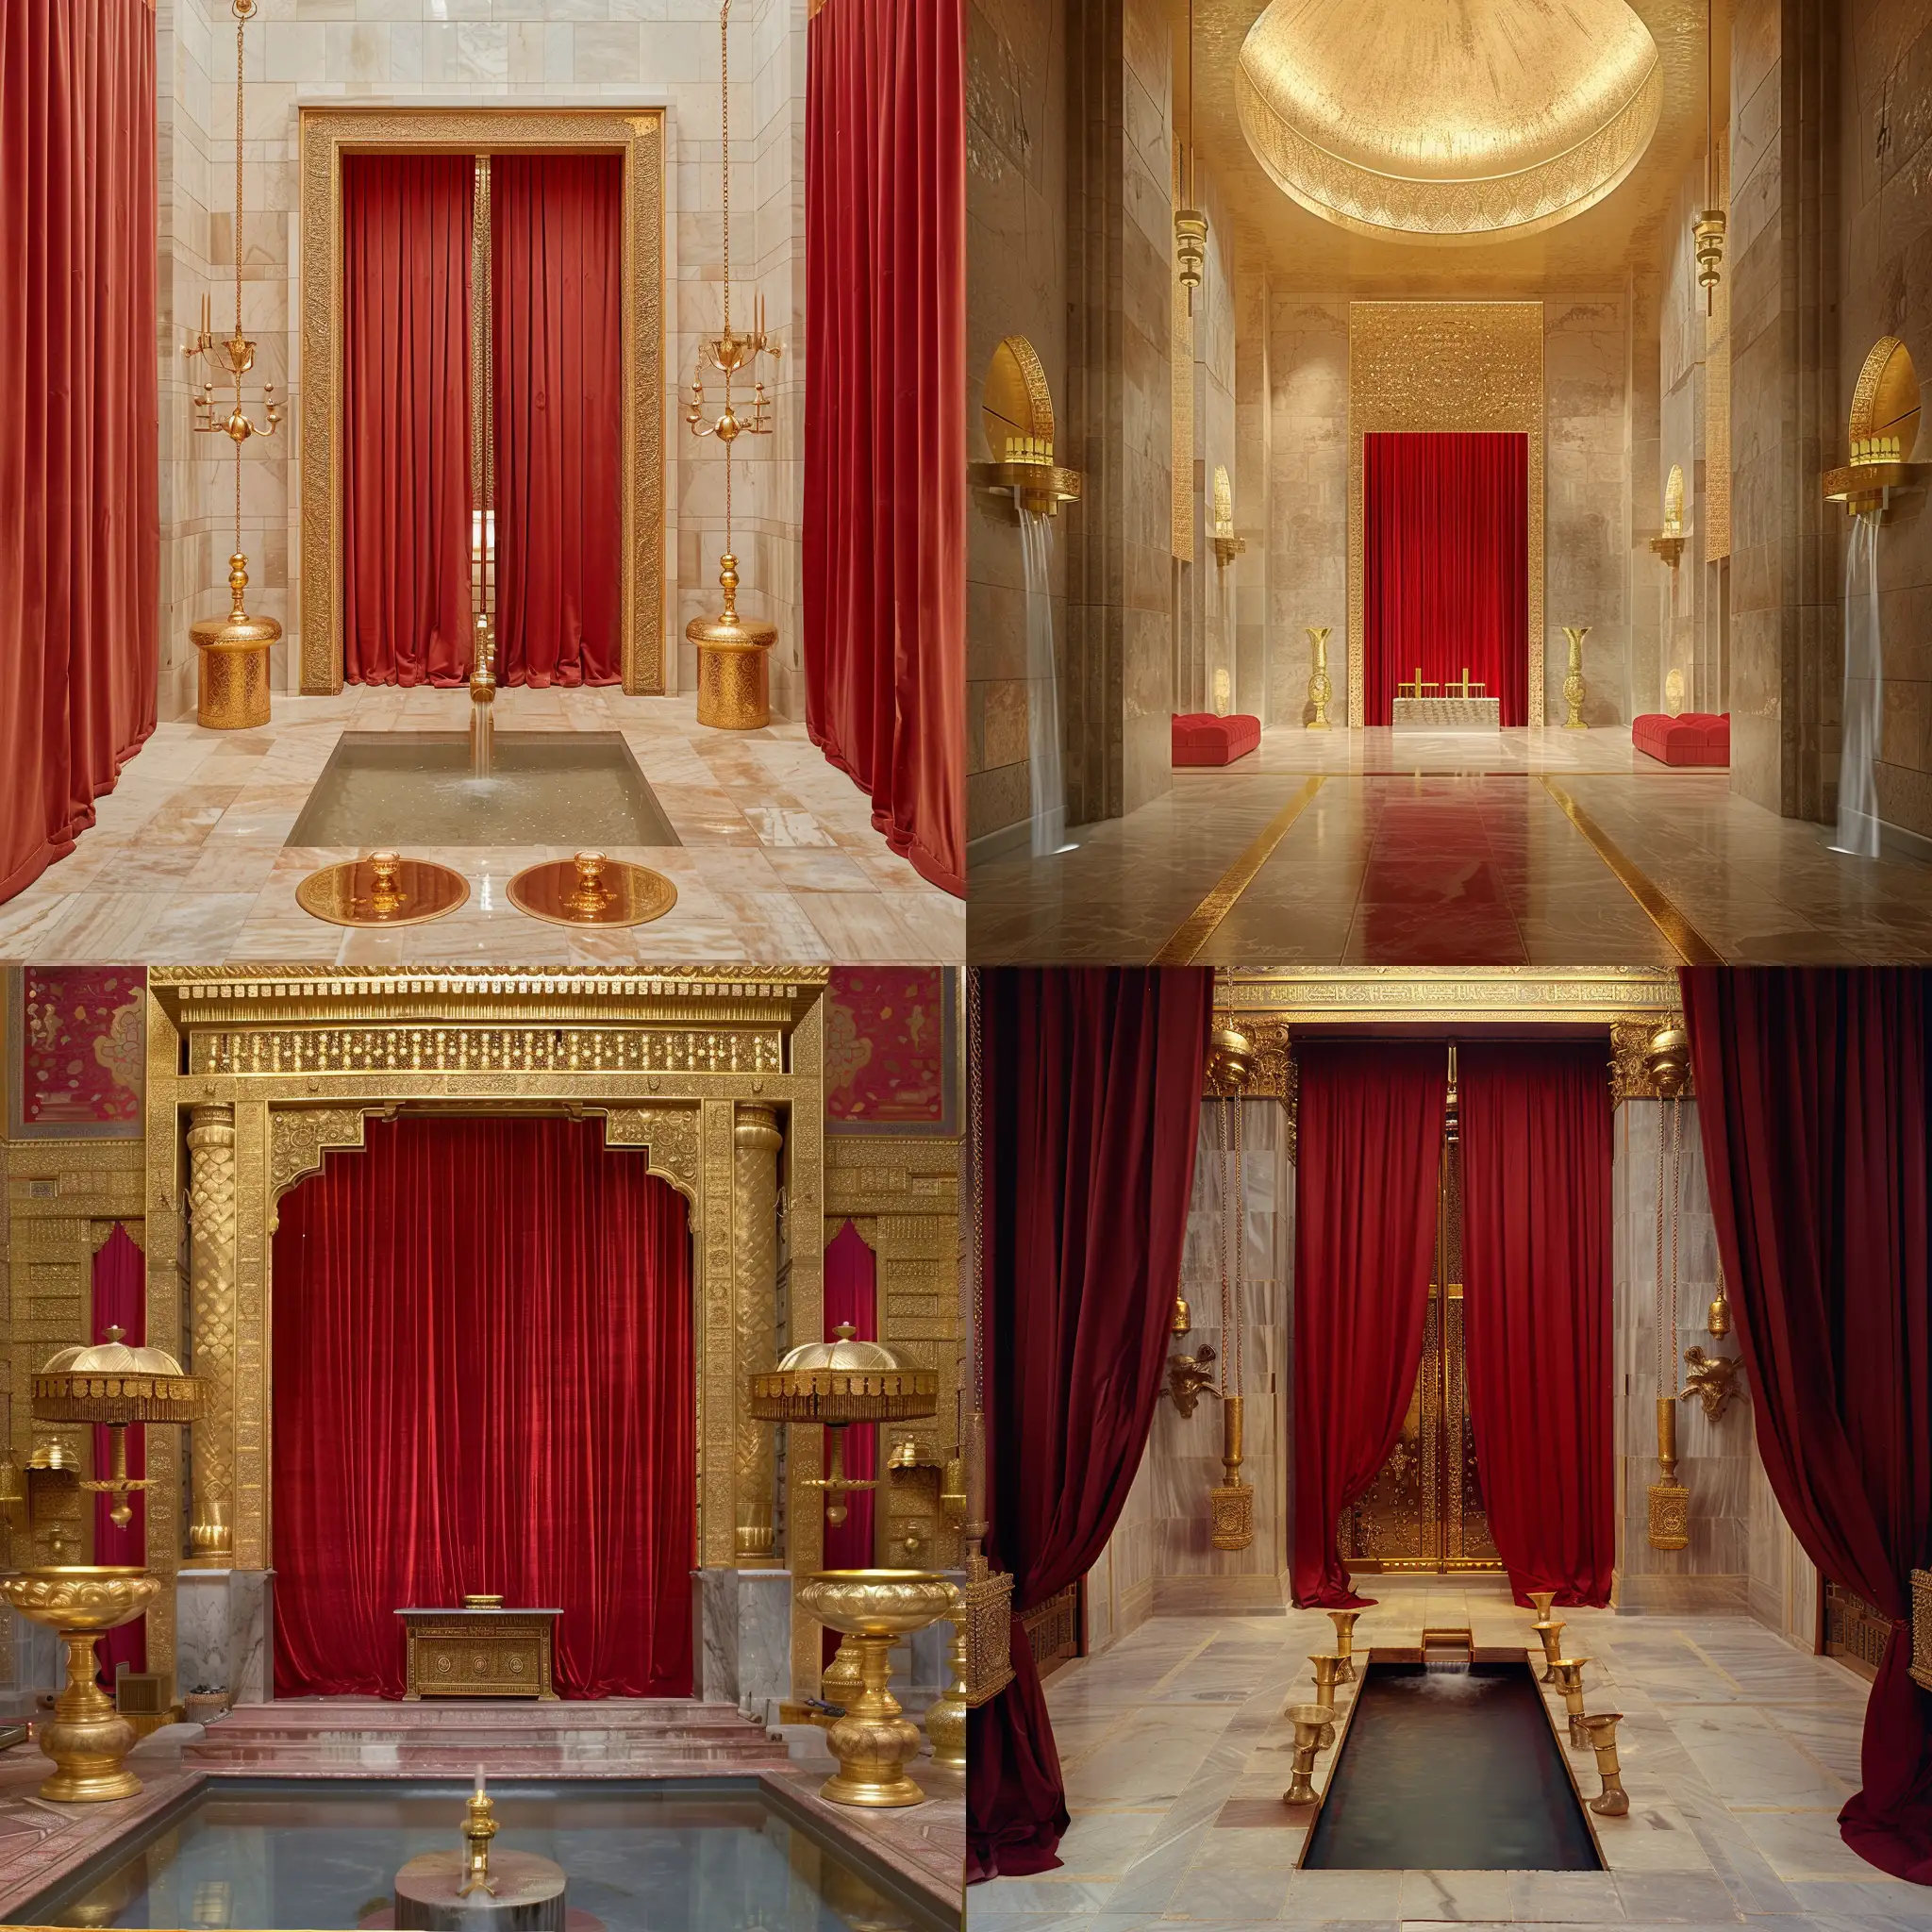 Modern-Interpretation-of-King-Solomons-Temple-with-Red-Curtain-Door-and-Gold-Fixtures